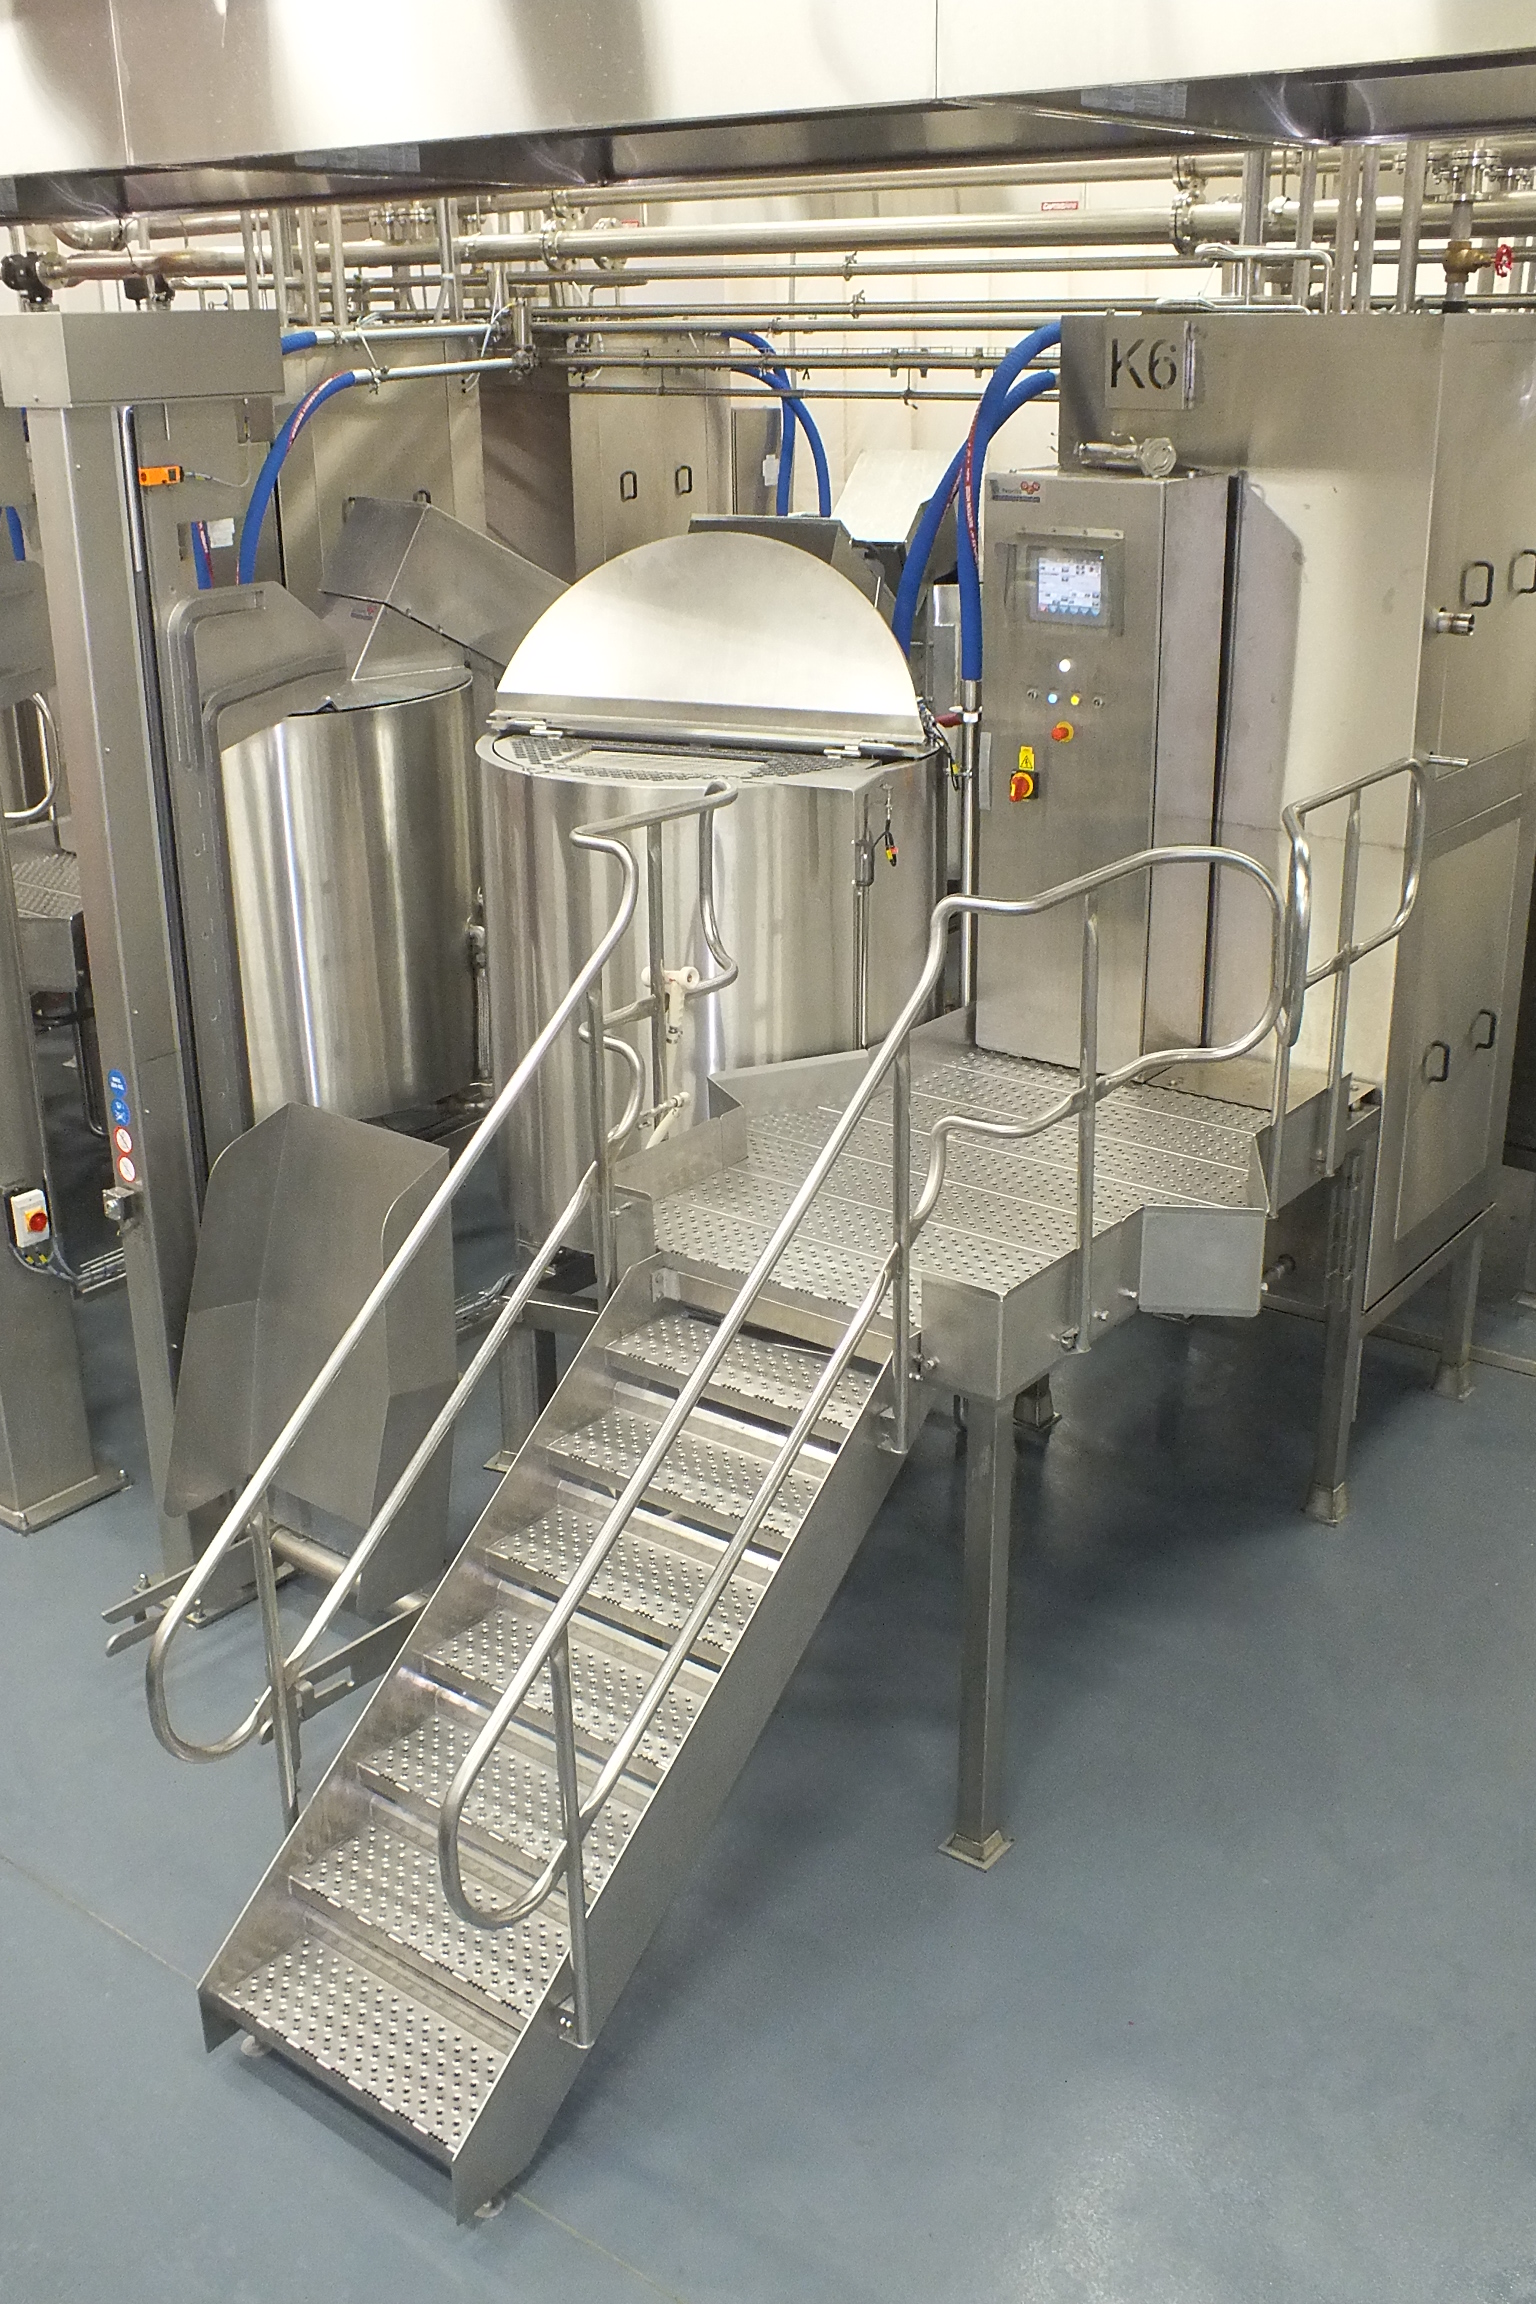 Steps leading to steam jacketed kettle